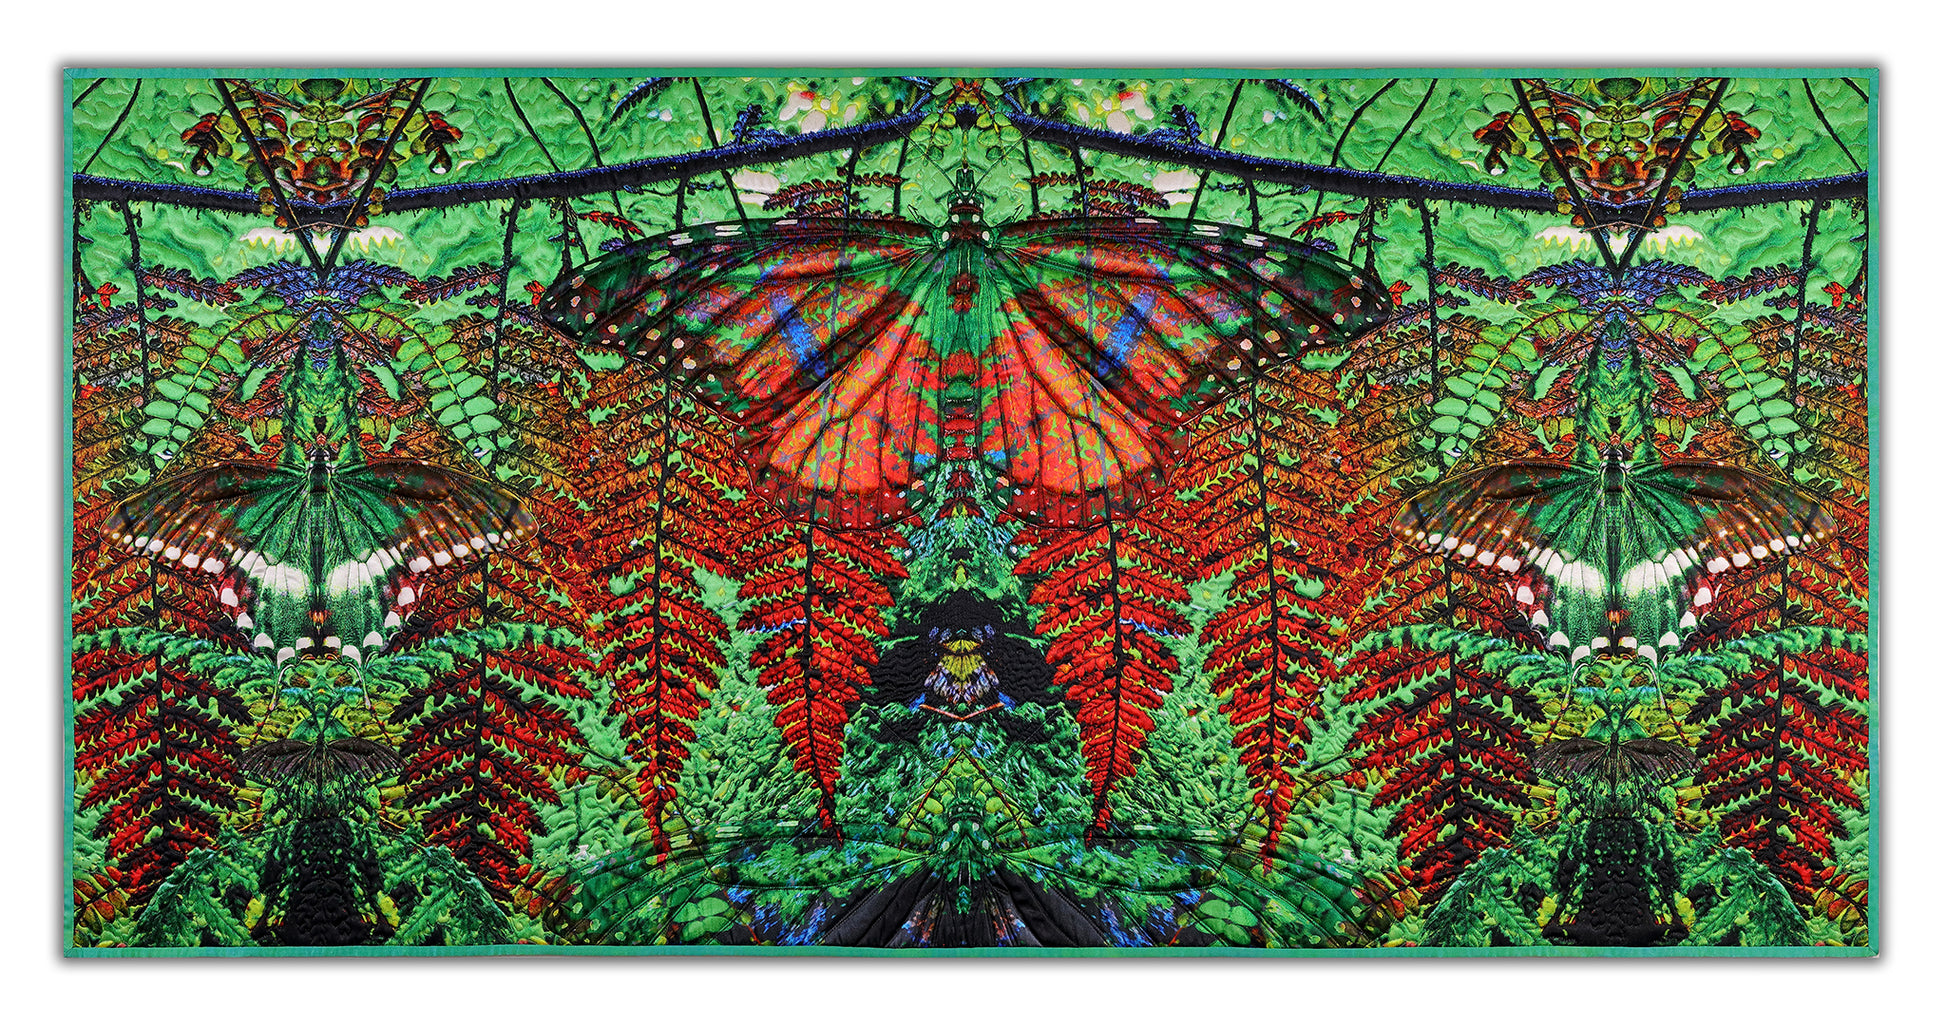 ART QUILT TITLED: Rainforest Morph, CREATED by Karen Hampton, 48 1/4” x 23 1/2” These luminescent digital/quilted pieces are a collaboration of husband and wife. Original photos digitally printed on satin polyester fabric with cotton batting. Quilted with silk thread.